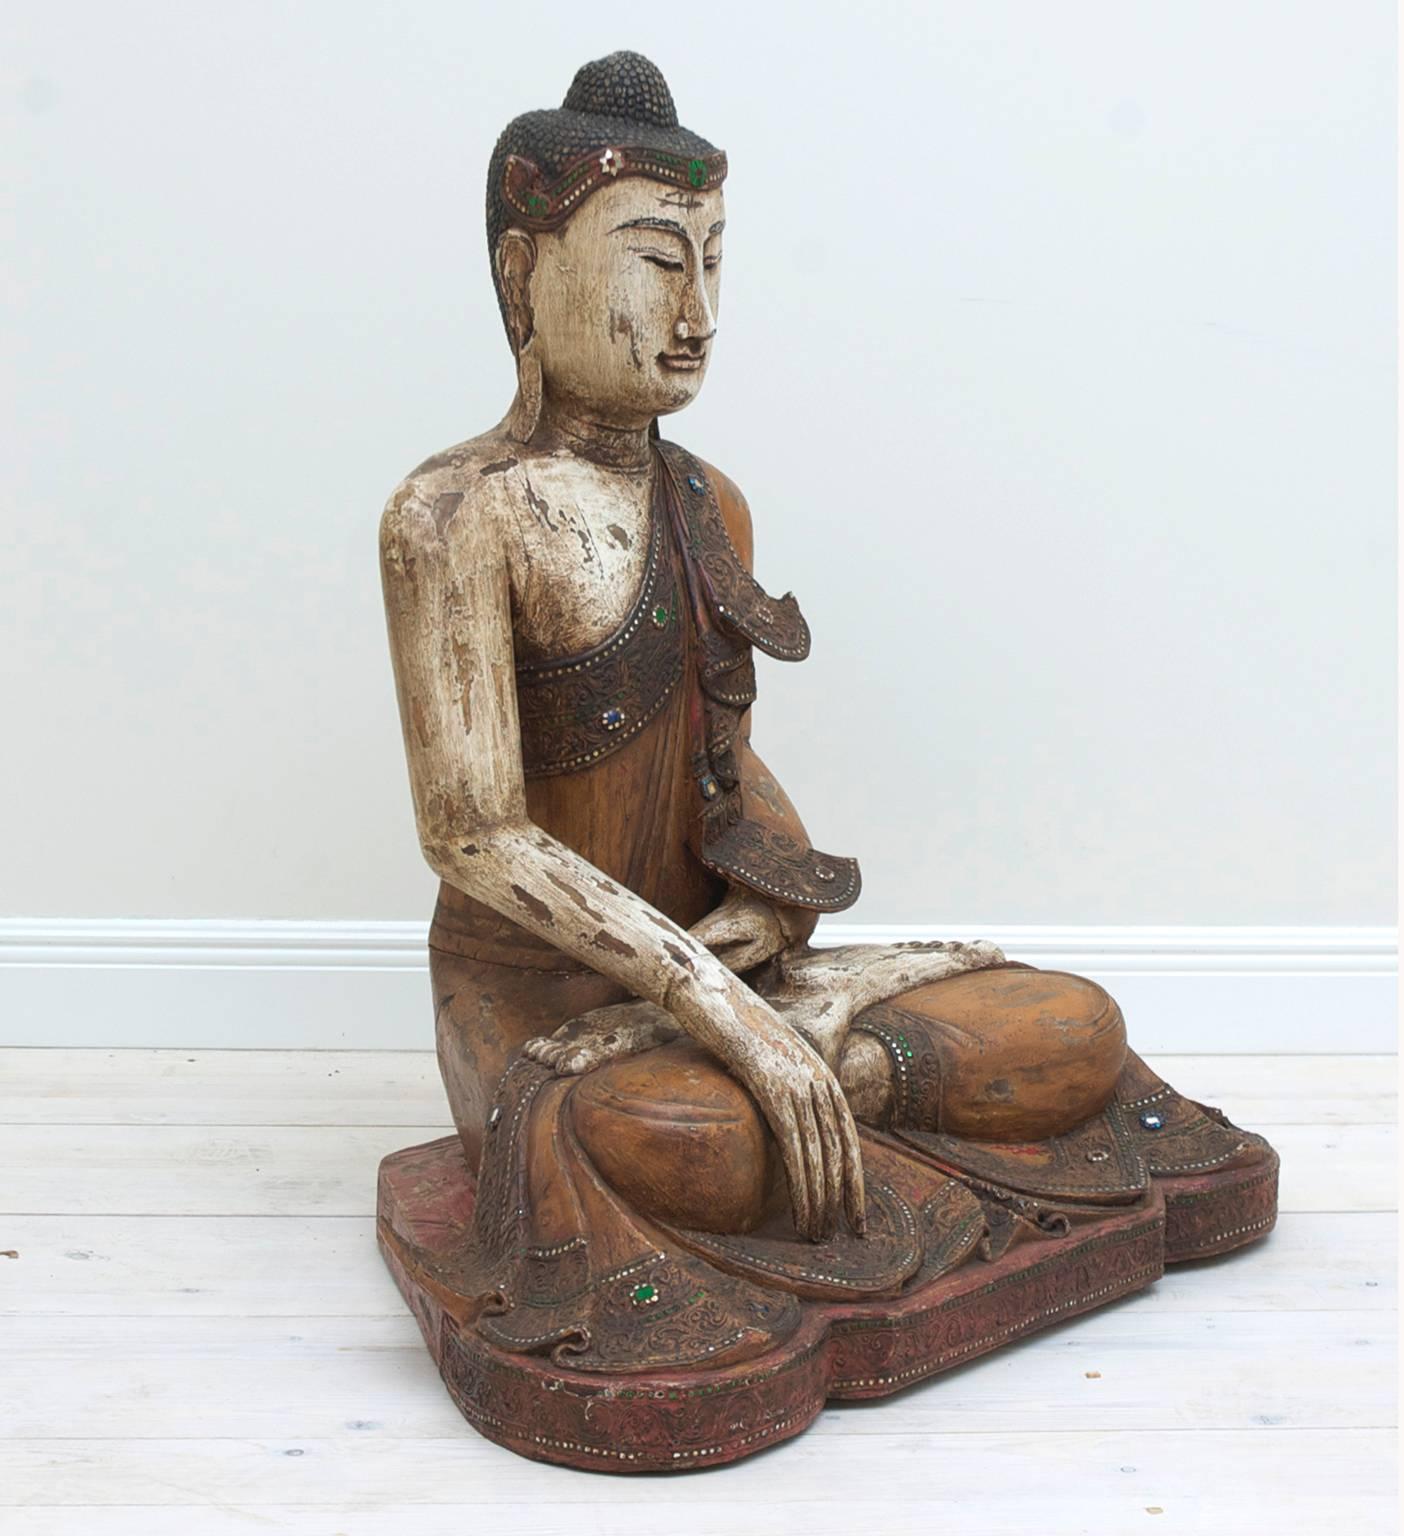 This youthful, sweet-faced image of the Buddha wearing a robe elaborately folded, edged and decorated often with inset mirror glass, is known as a ”Mandalay Buddha” from Burma or present day Myanmar.  This form of Budha was prevalent from 1855-1945.